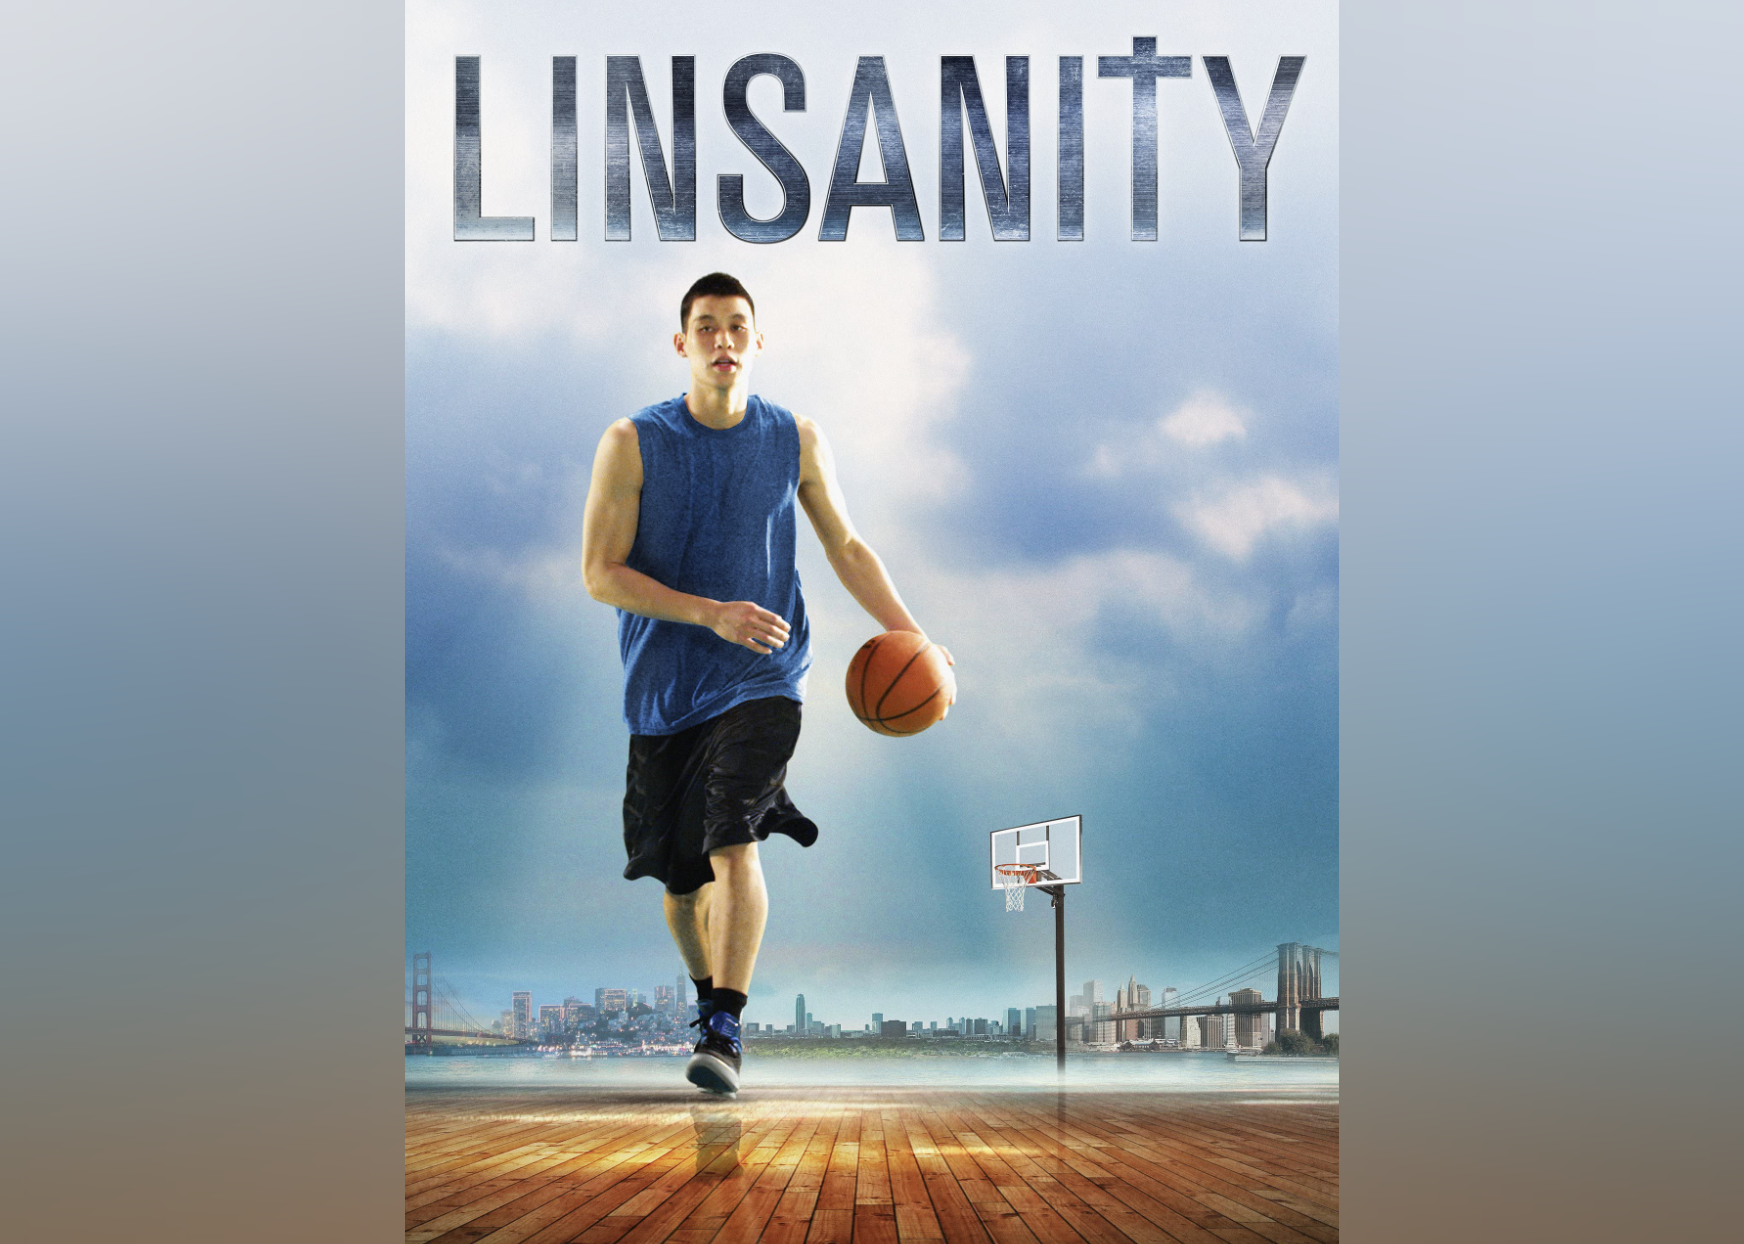 Jeremy Lin on the cover art for the film "Linsanity".